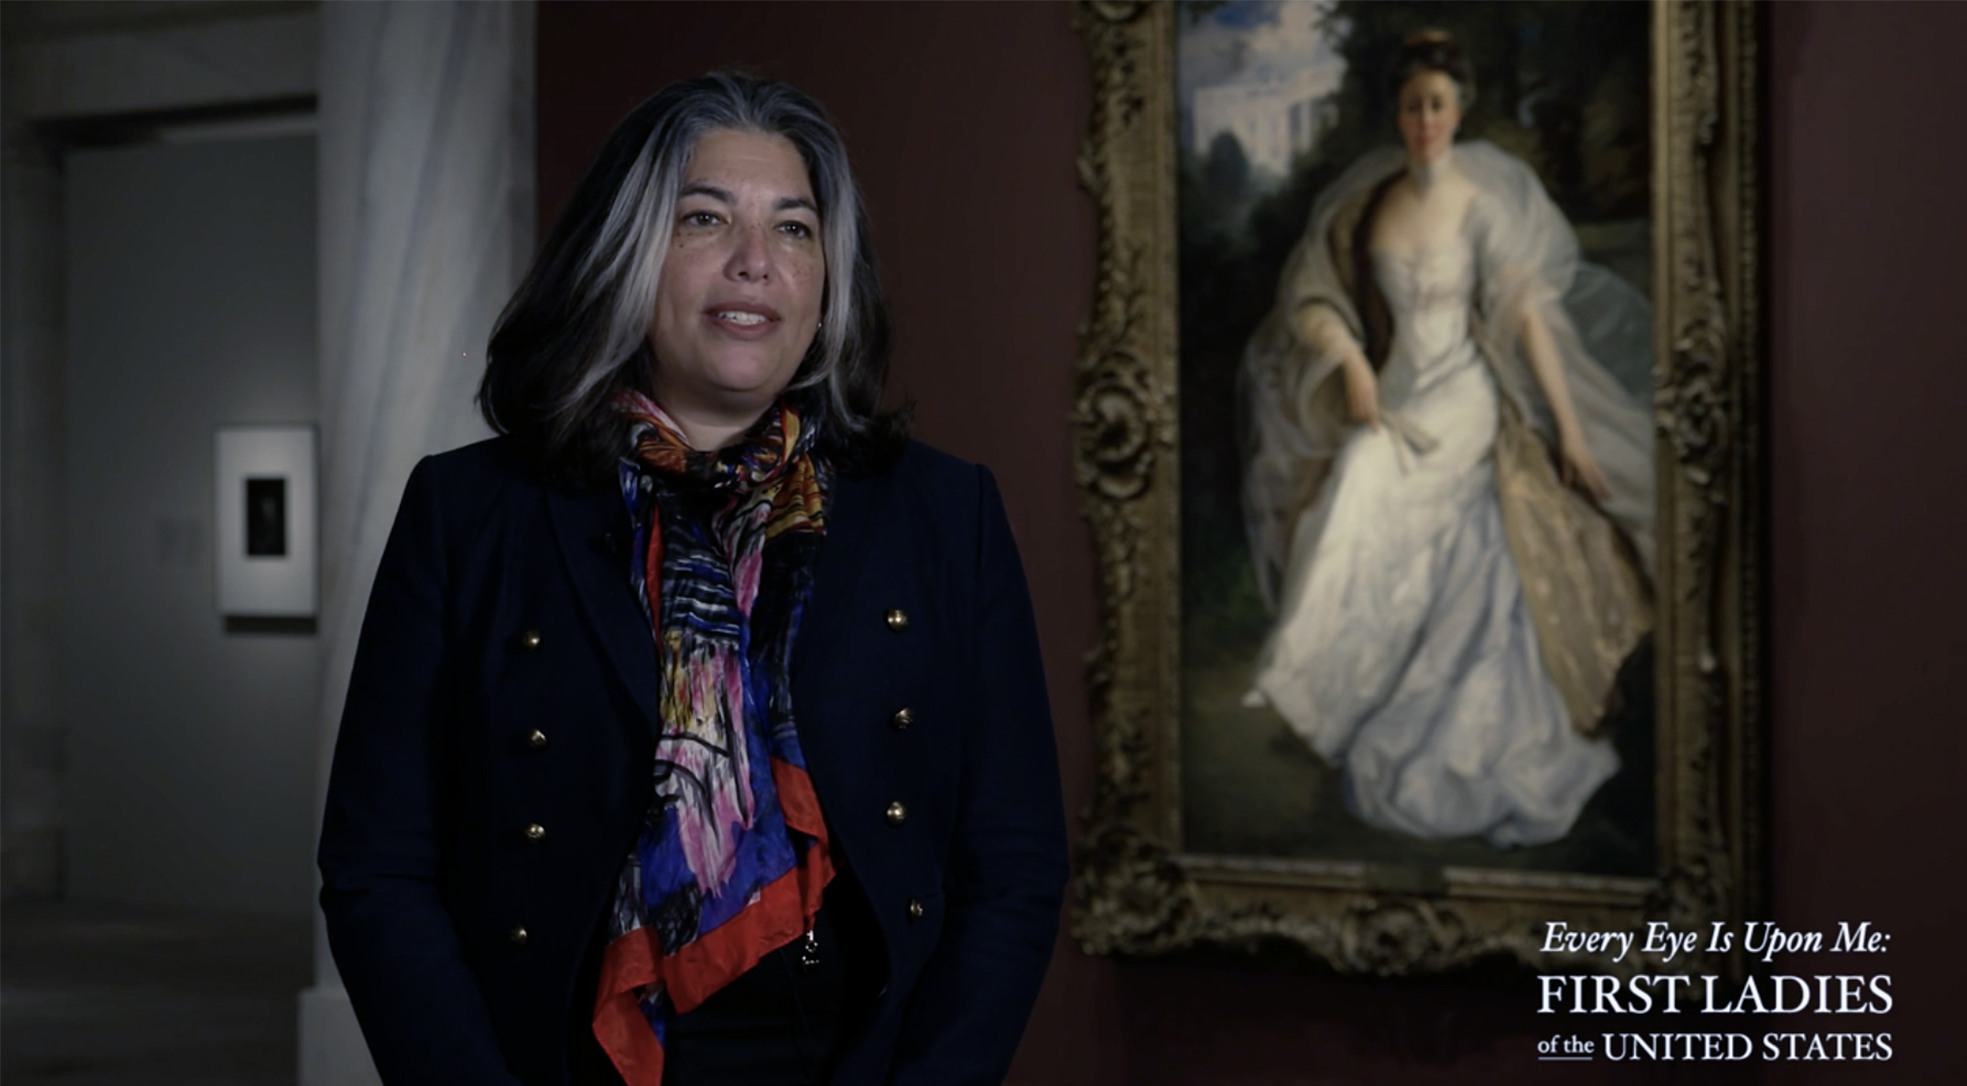 Professor standing in front of a portrait in a museum gallery